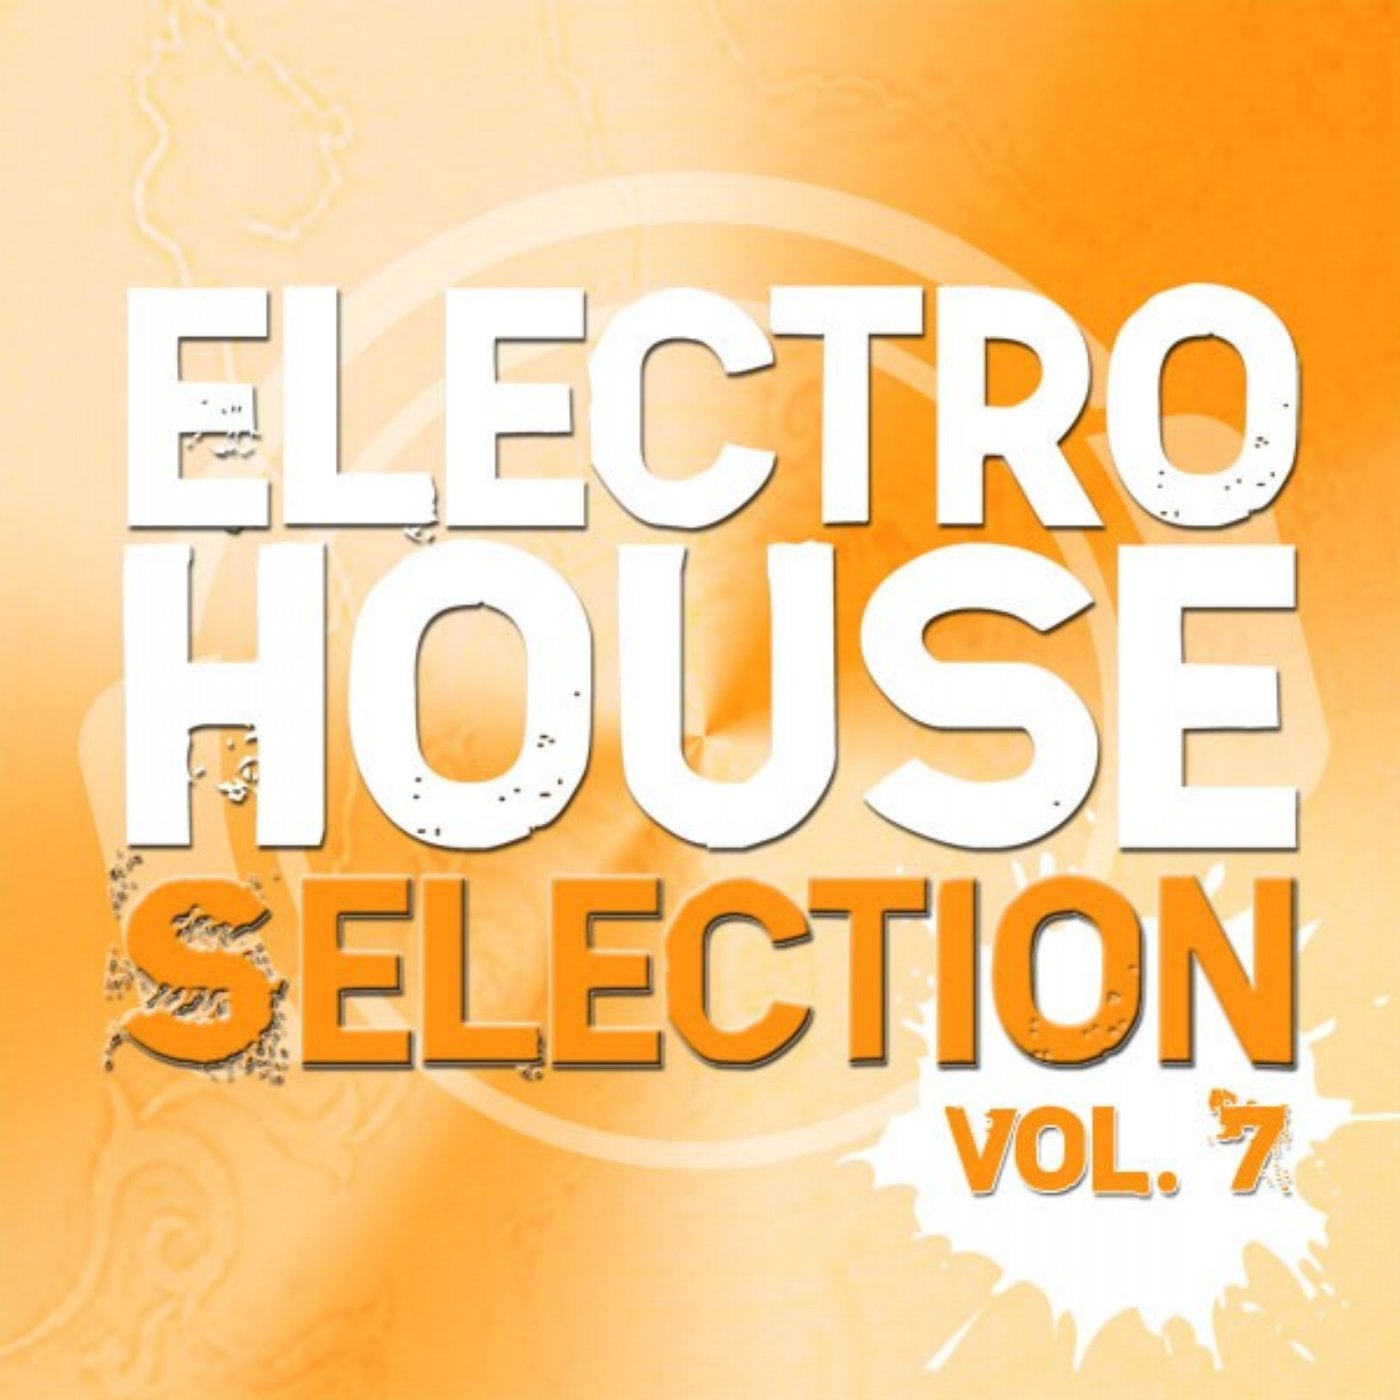 Mental Madness Pres. Electro House Selection: Vol. 7